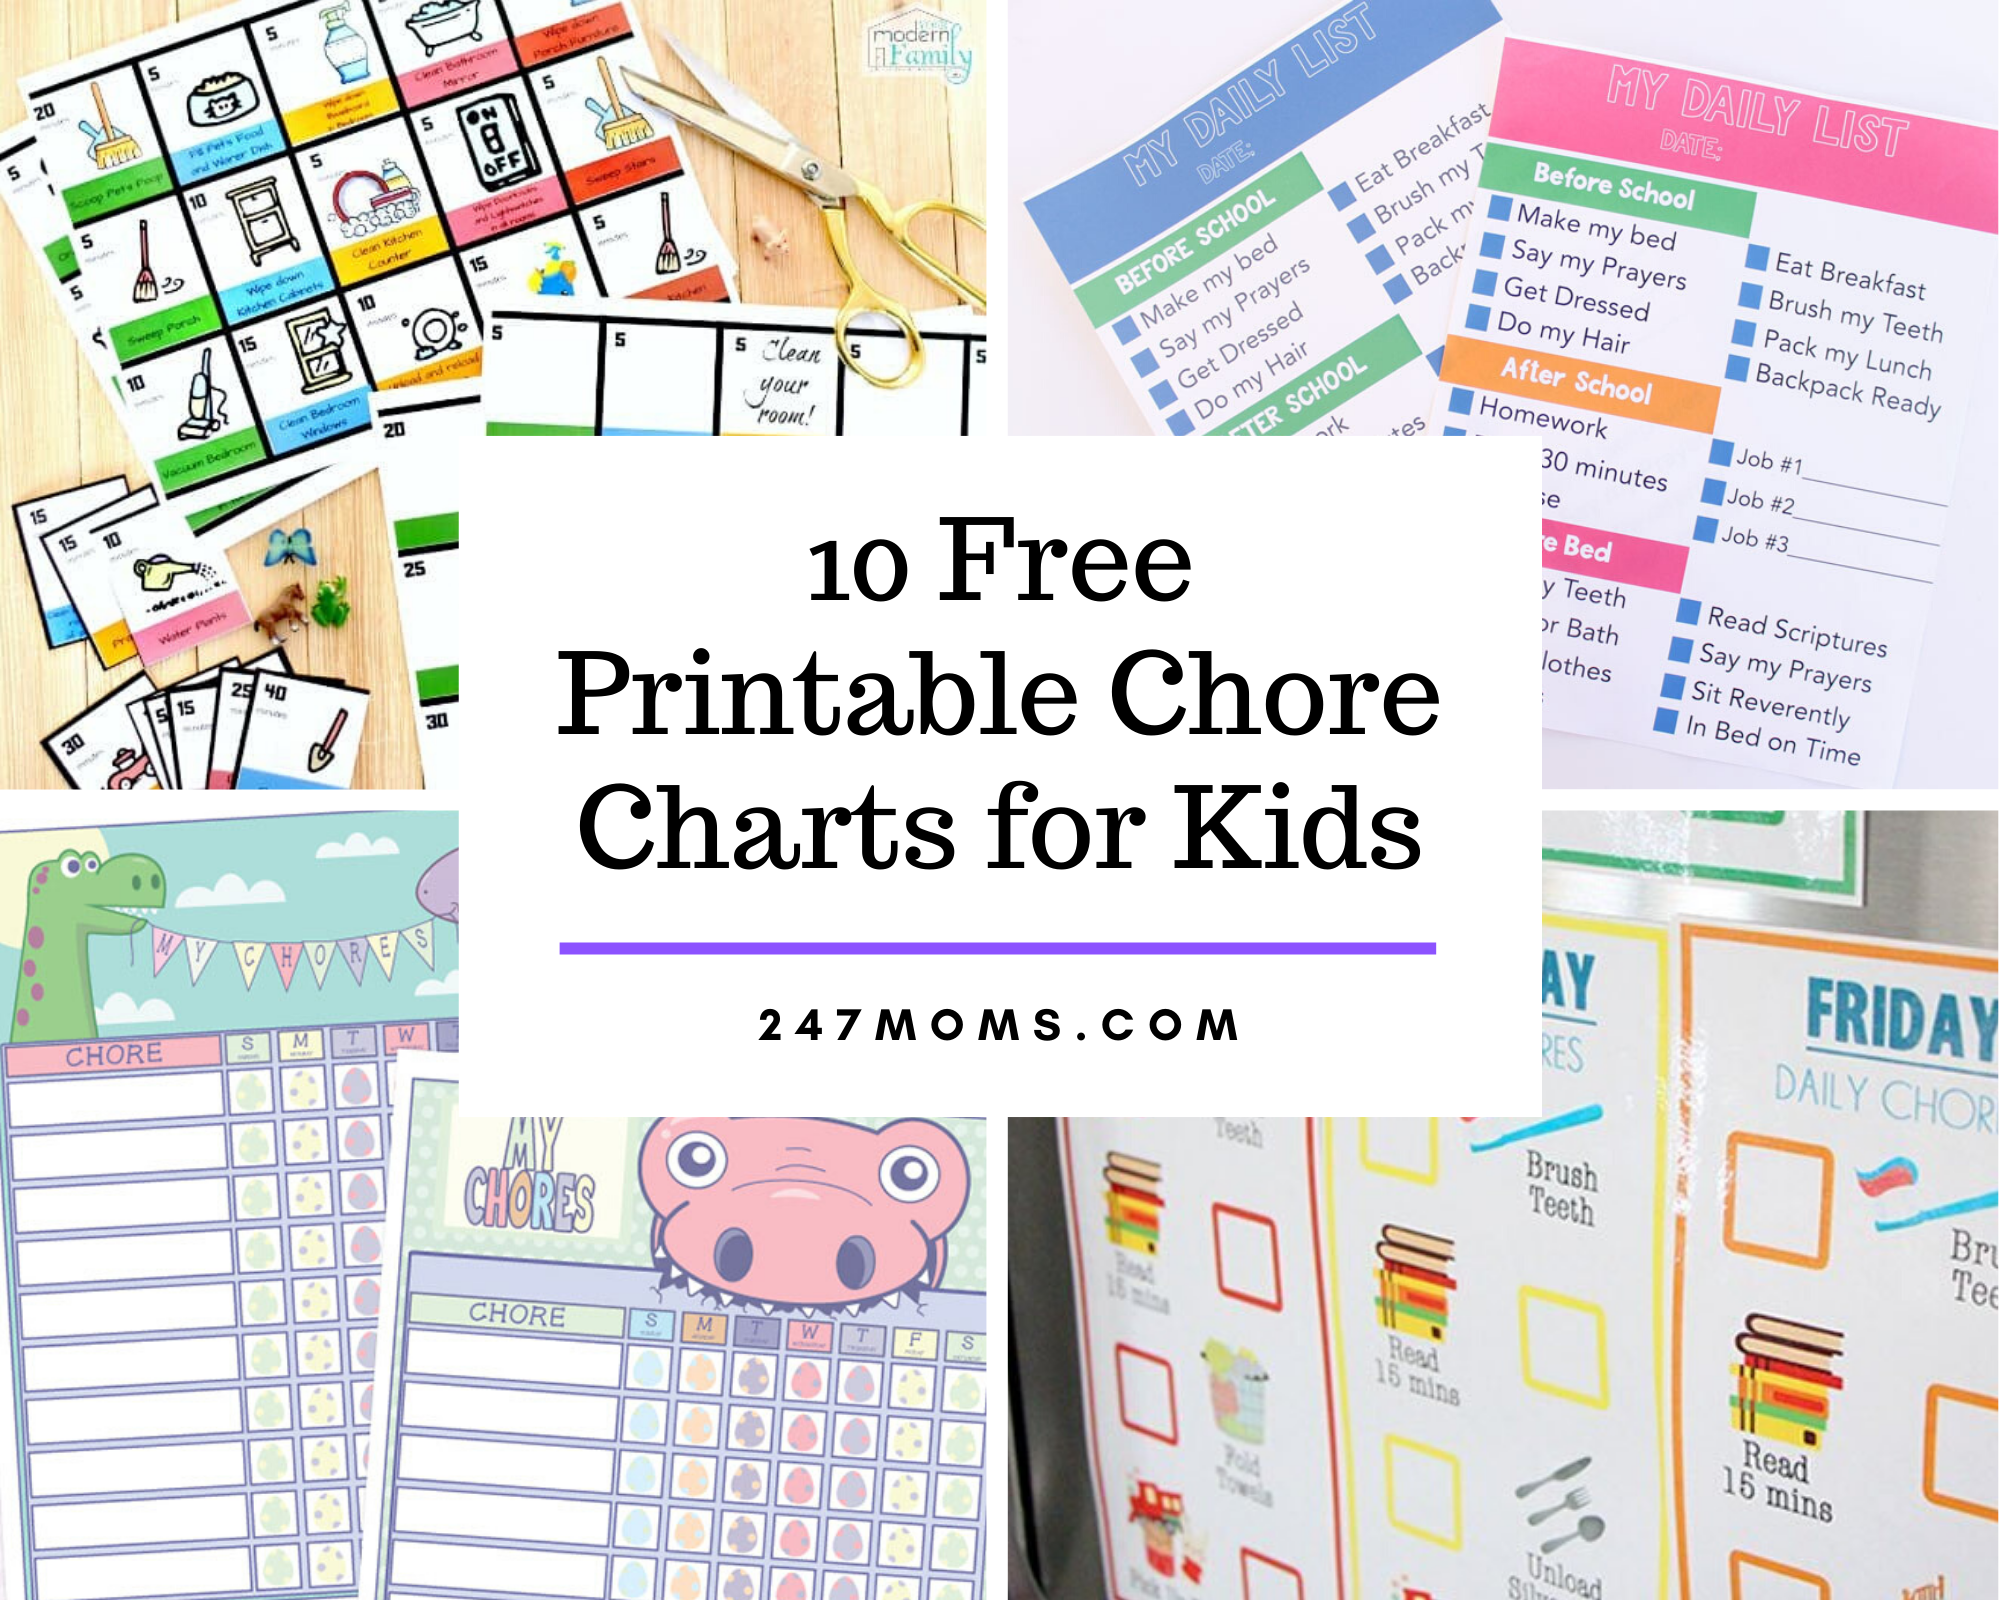 10 Free Printable Chore Charts For Kids 24 7 Moms - Free Printable Chore Charts For Kids With Pictures